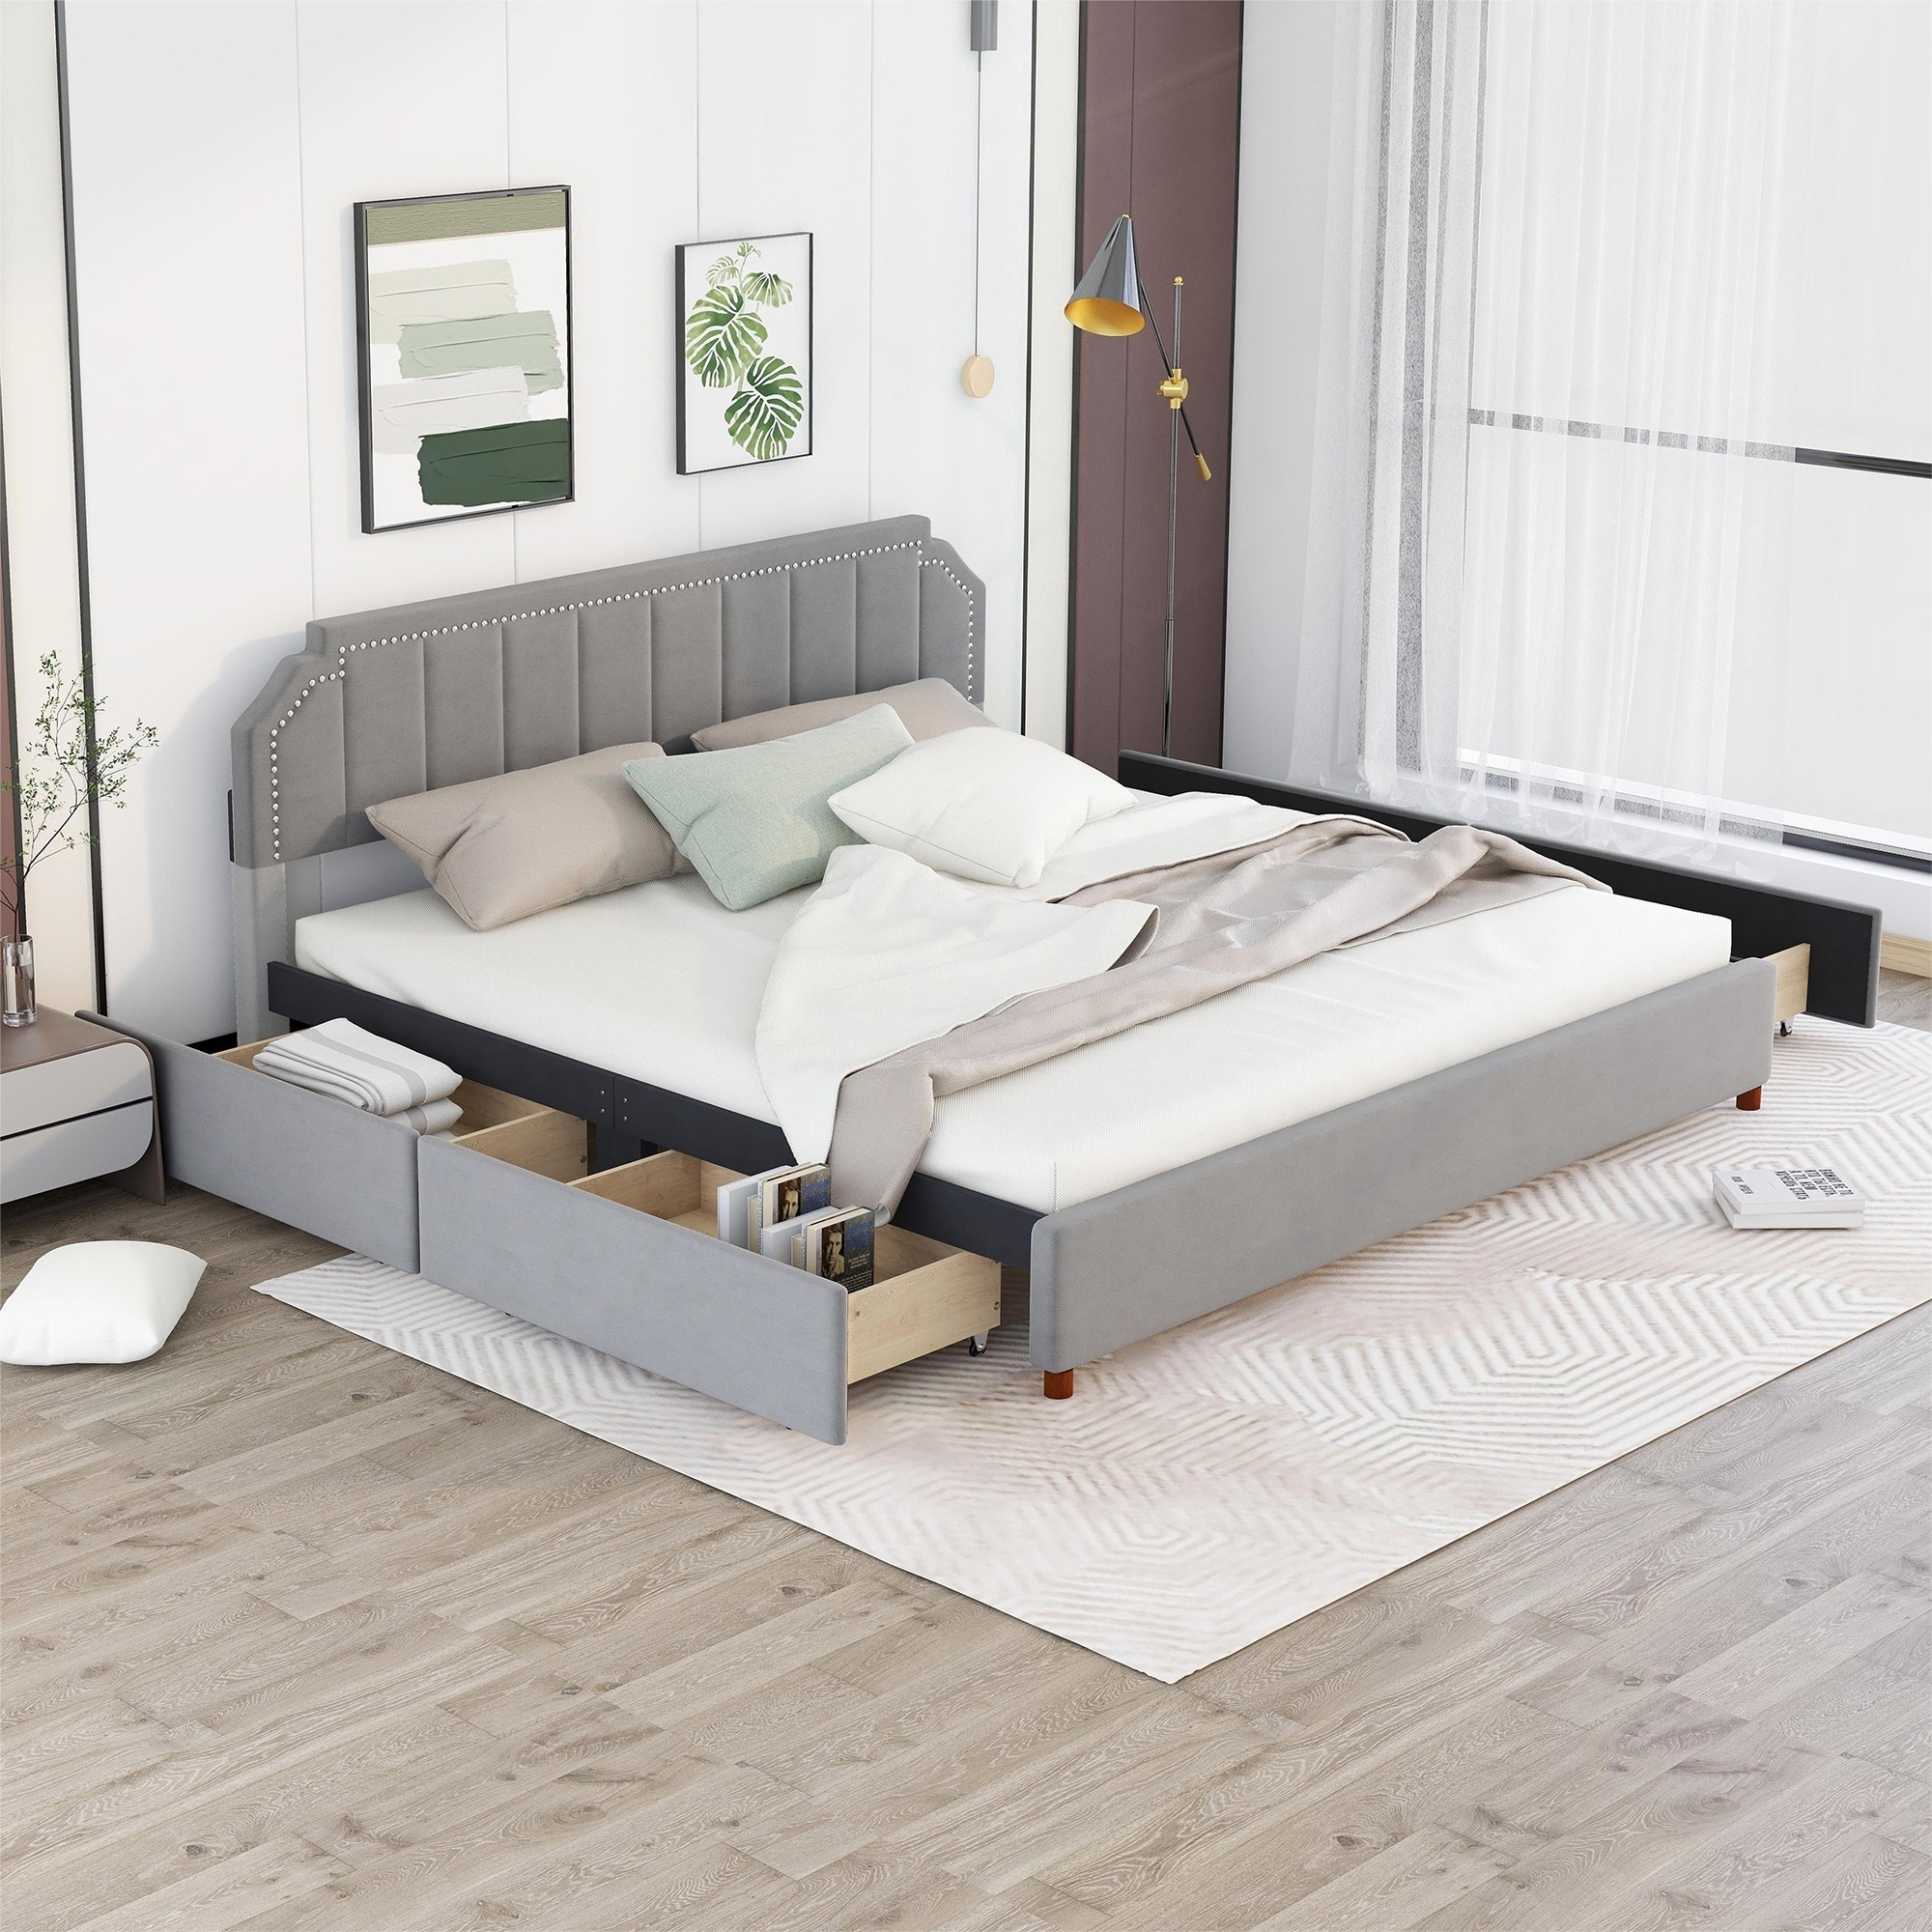 https://ak1.ostkcdn.com/images/products/is/images/direct/4364fc1794d7cd2e8b14149a7dbd5488c4860a98/King-Upholstery-Platform-Bed-with-4-Storage-Drawers%2C-Solid-Wood-Bedframe-w-Headboard-%26-Support-Legs-for-Bedroom%2C-Guest-Room%2CGrey.jpg